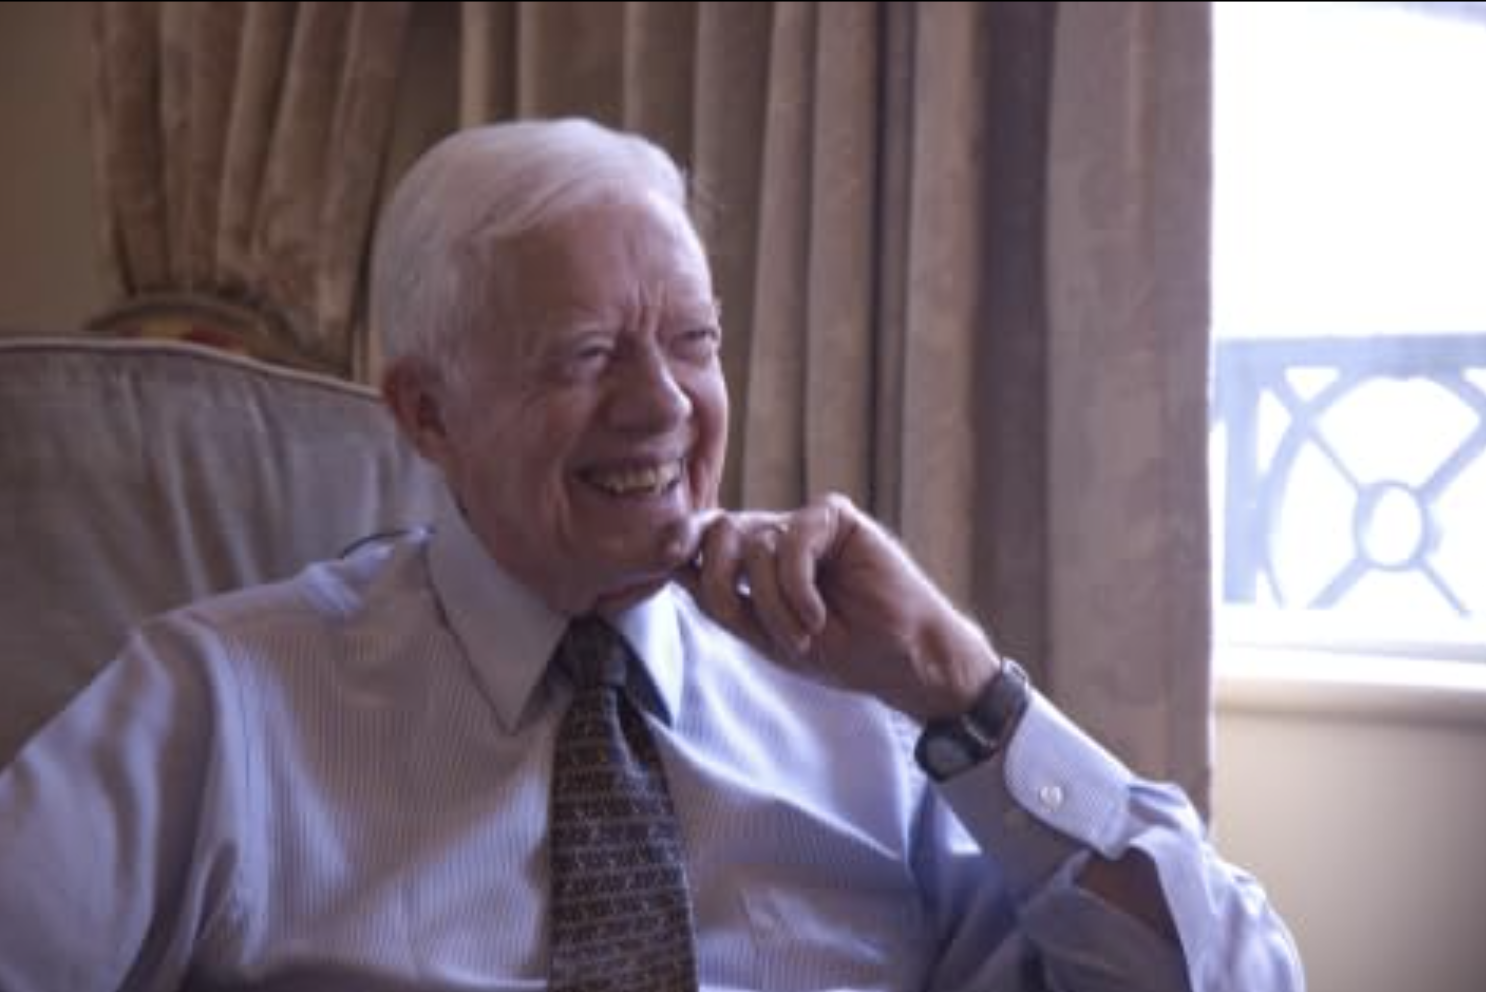 Jimmy Carter in the 2007 documentary Man from Plains